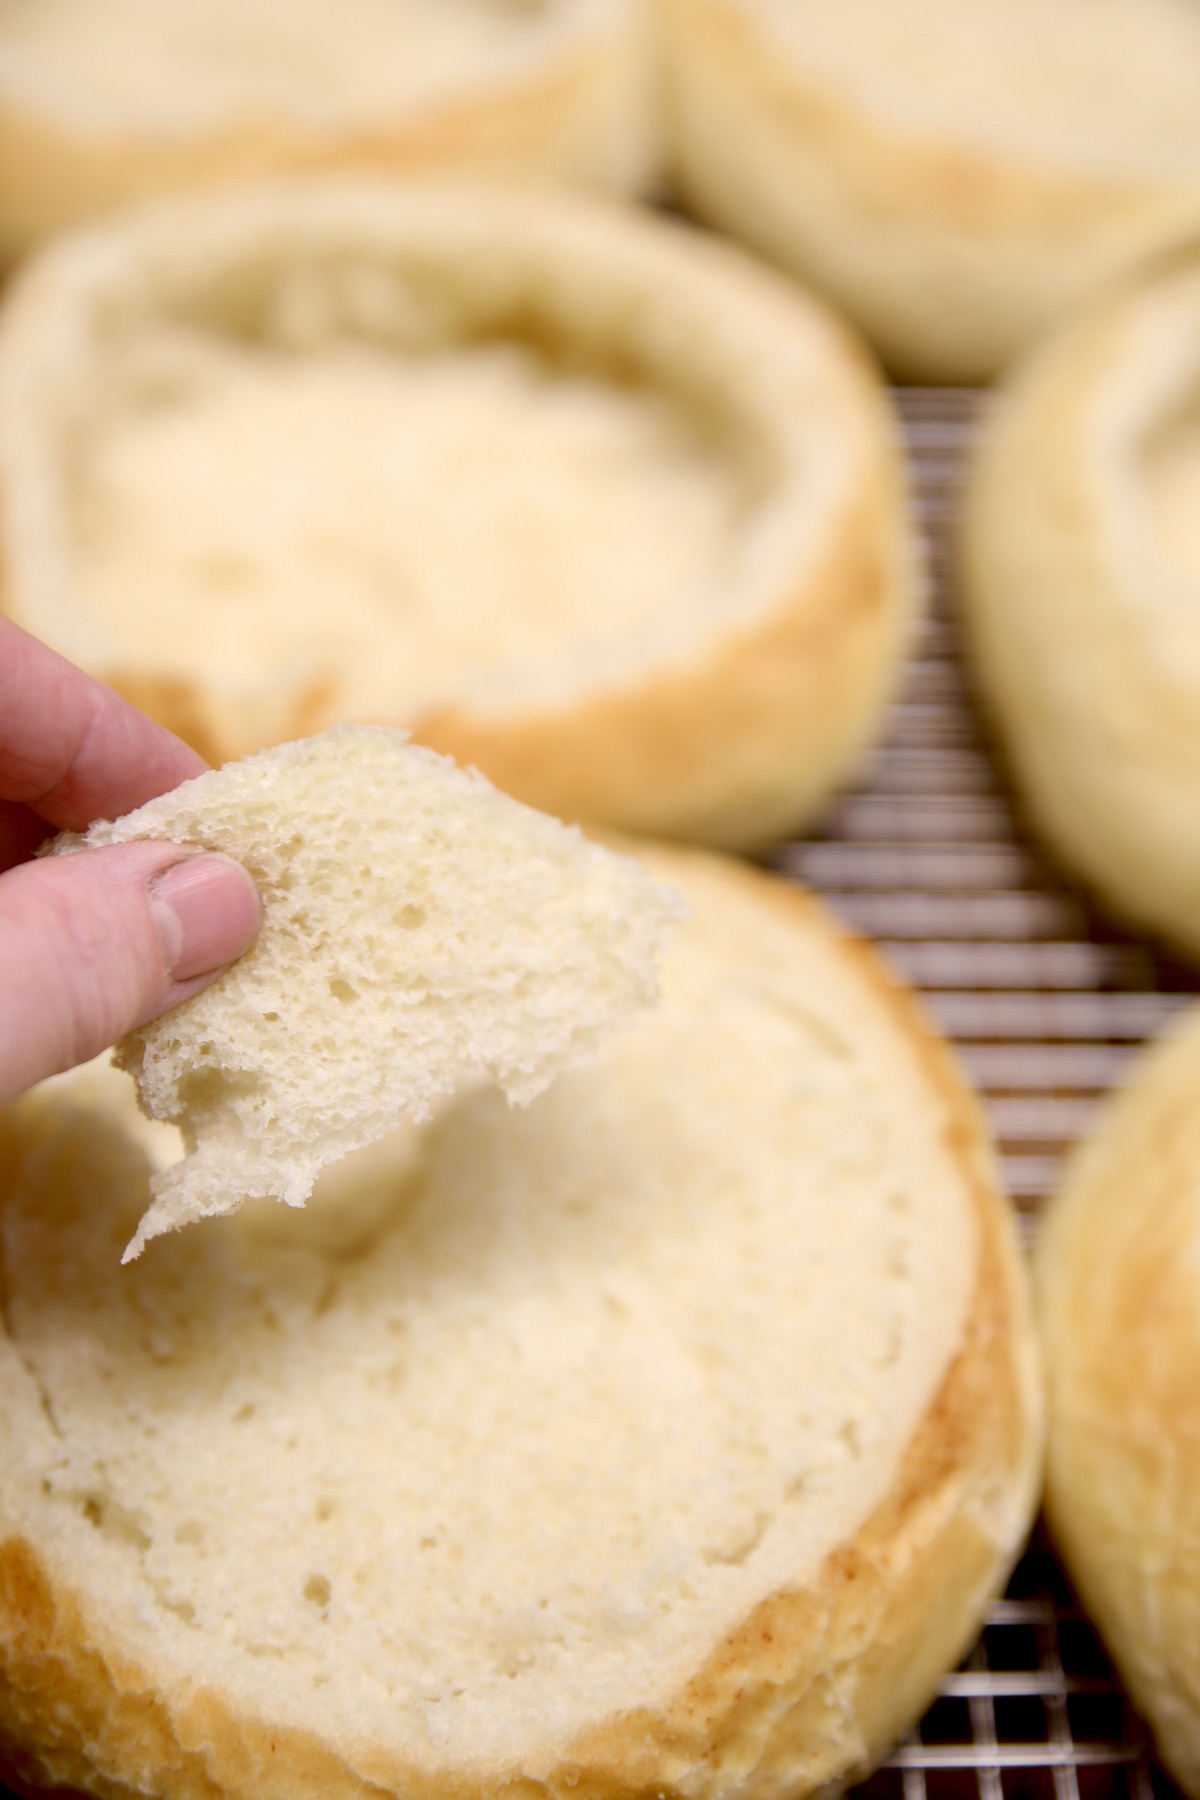 Removing inside of bread bowl for soup.